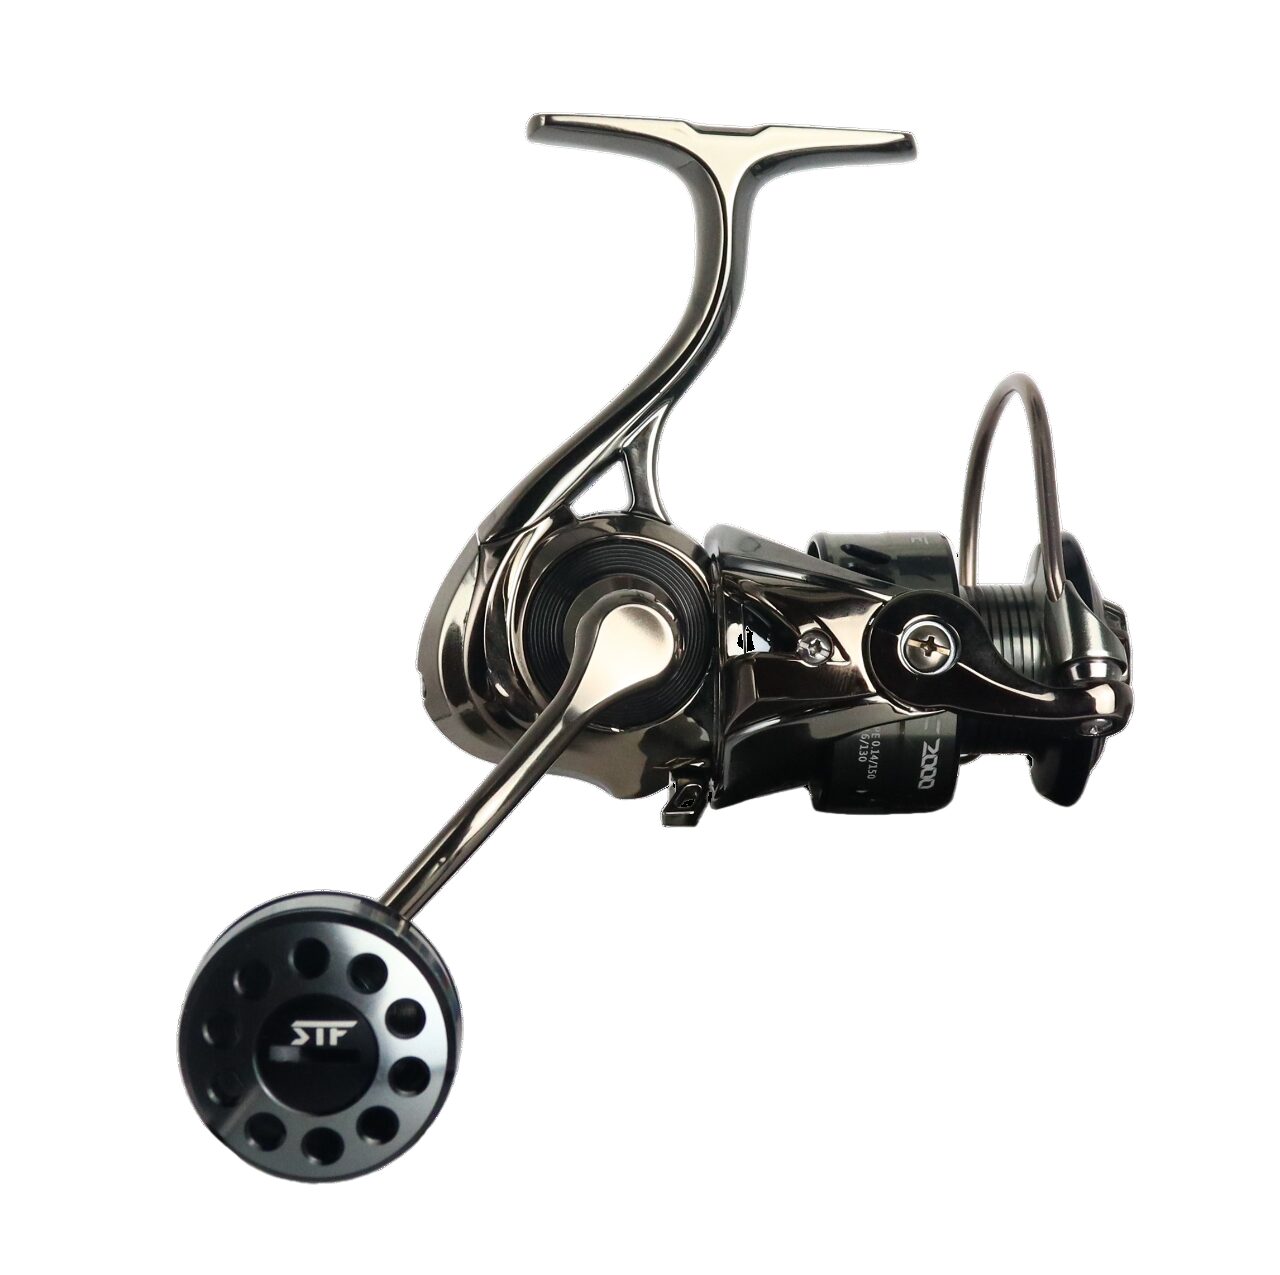 STF REVIVE C Series Spinning Reel - Sark's Total Fishing